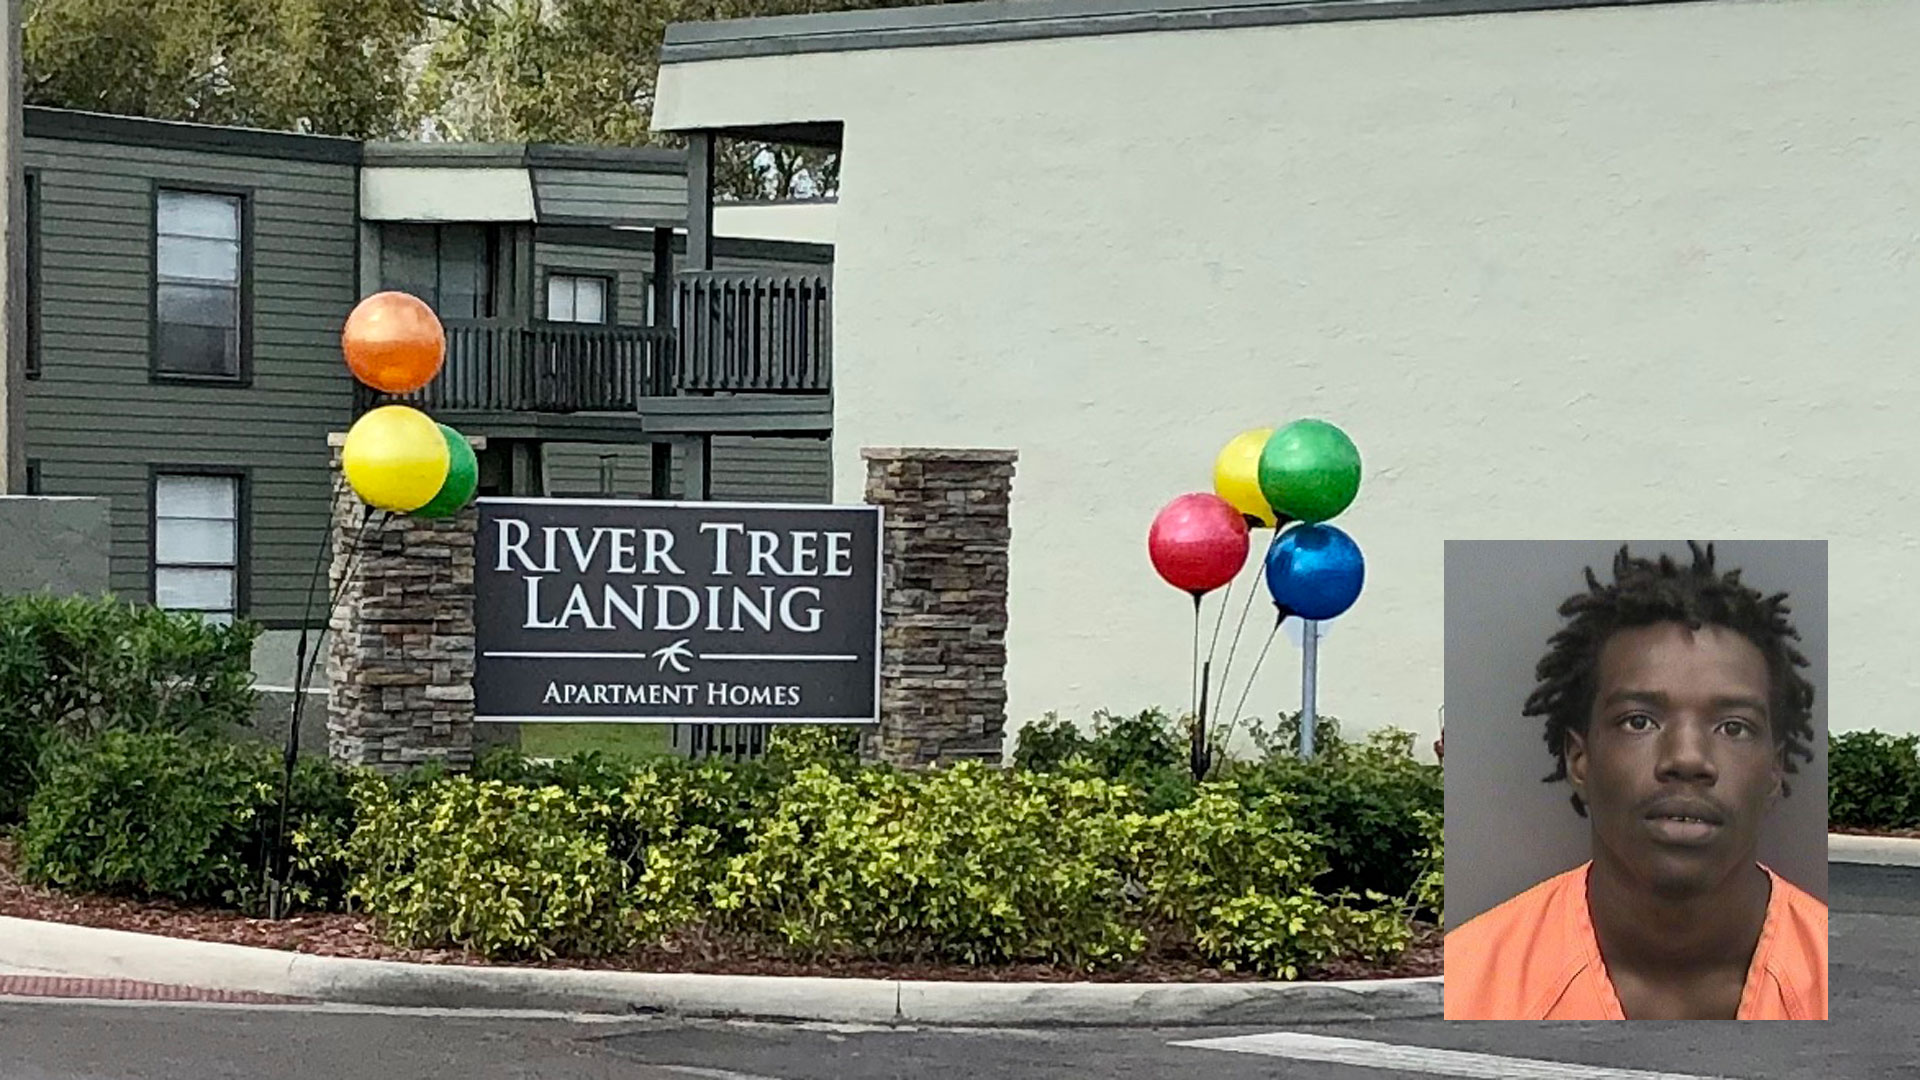 Main photo: Exterior of River Tree Landing in Hillsborough County, where the incident reportedly occurred; Inset: Christopher Reddick, 19, was arrested Wednesday for aggravated child abuse with great bodily harm and other charges.